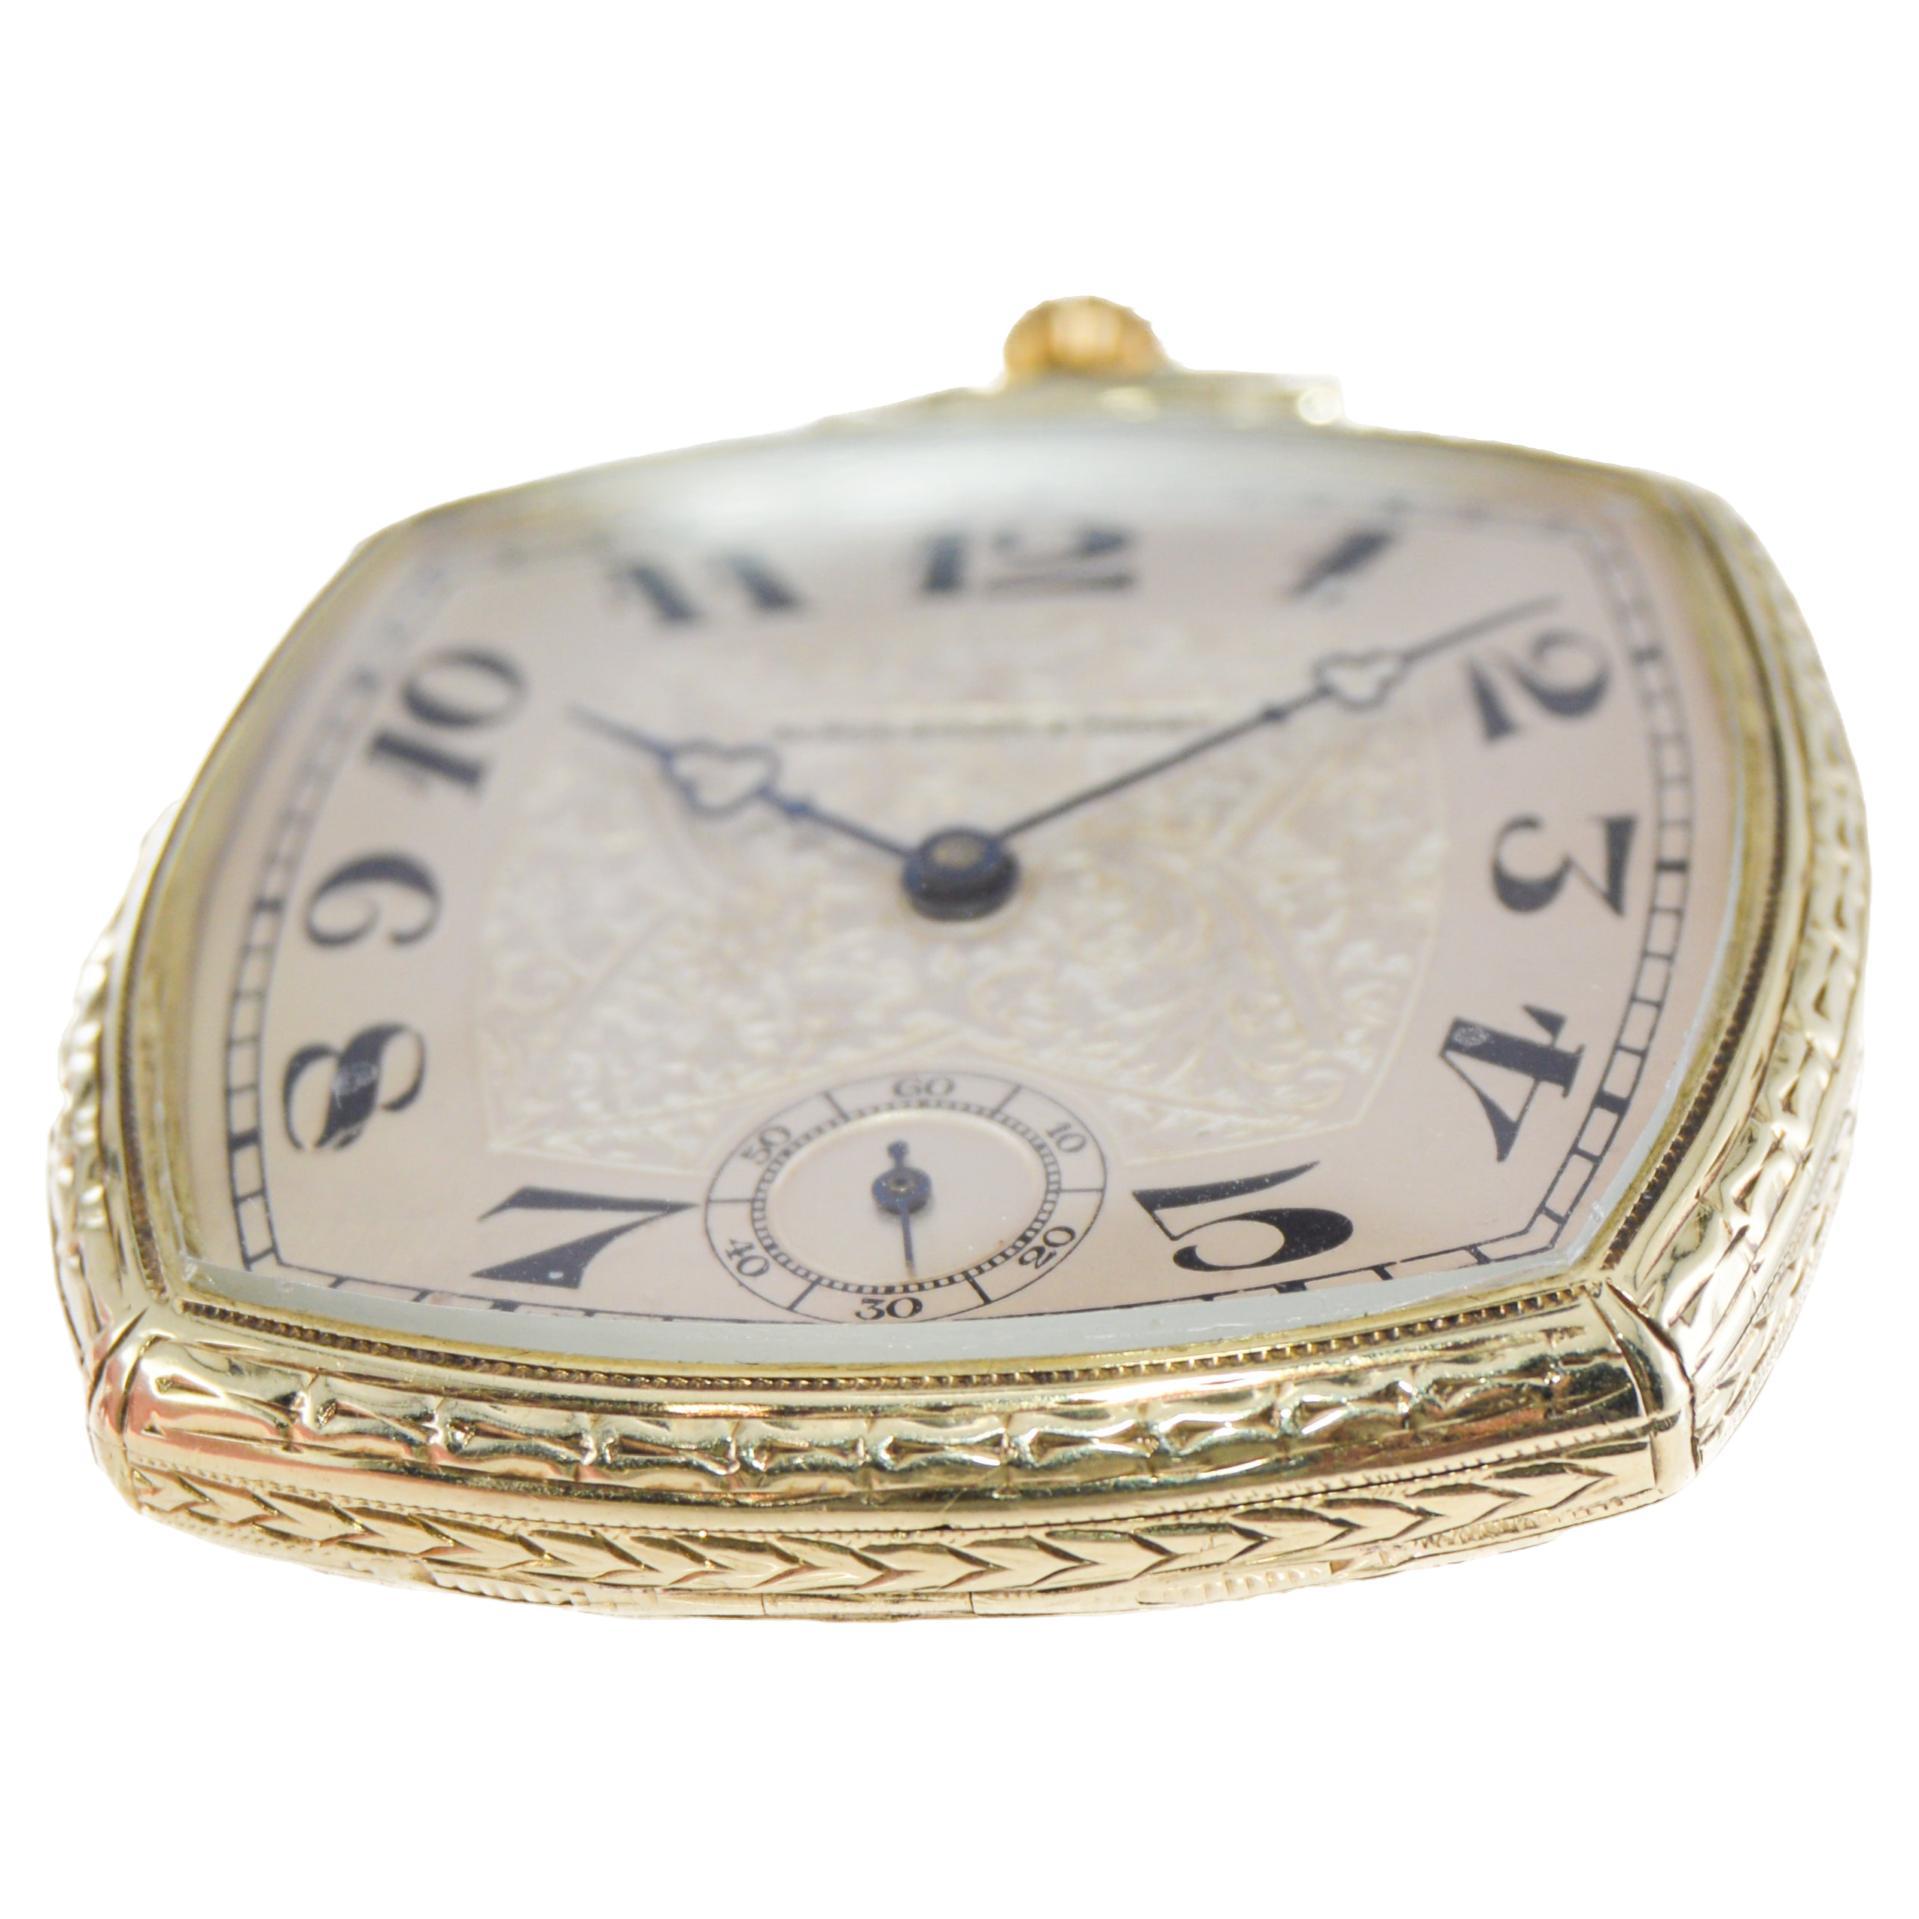 Black Starr & Frost 14 Karat Gold Art Deco Pocket Watch with Engraved Dial  For Sale 5